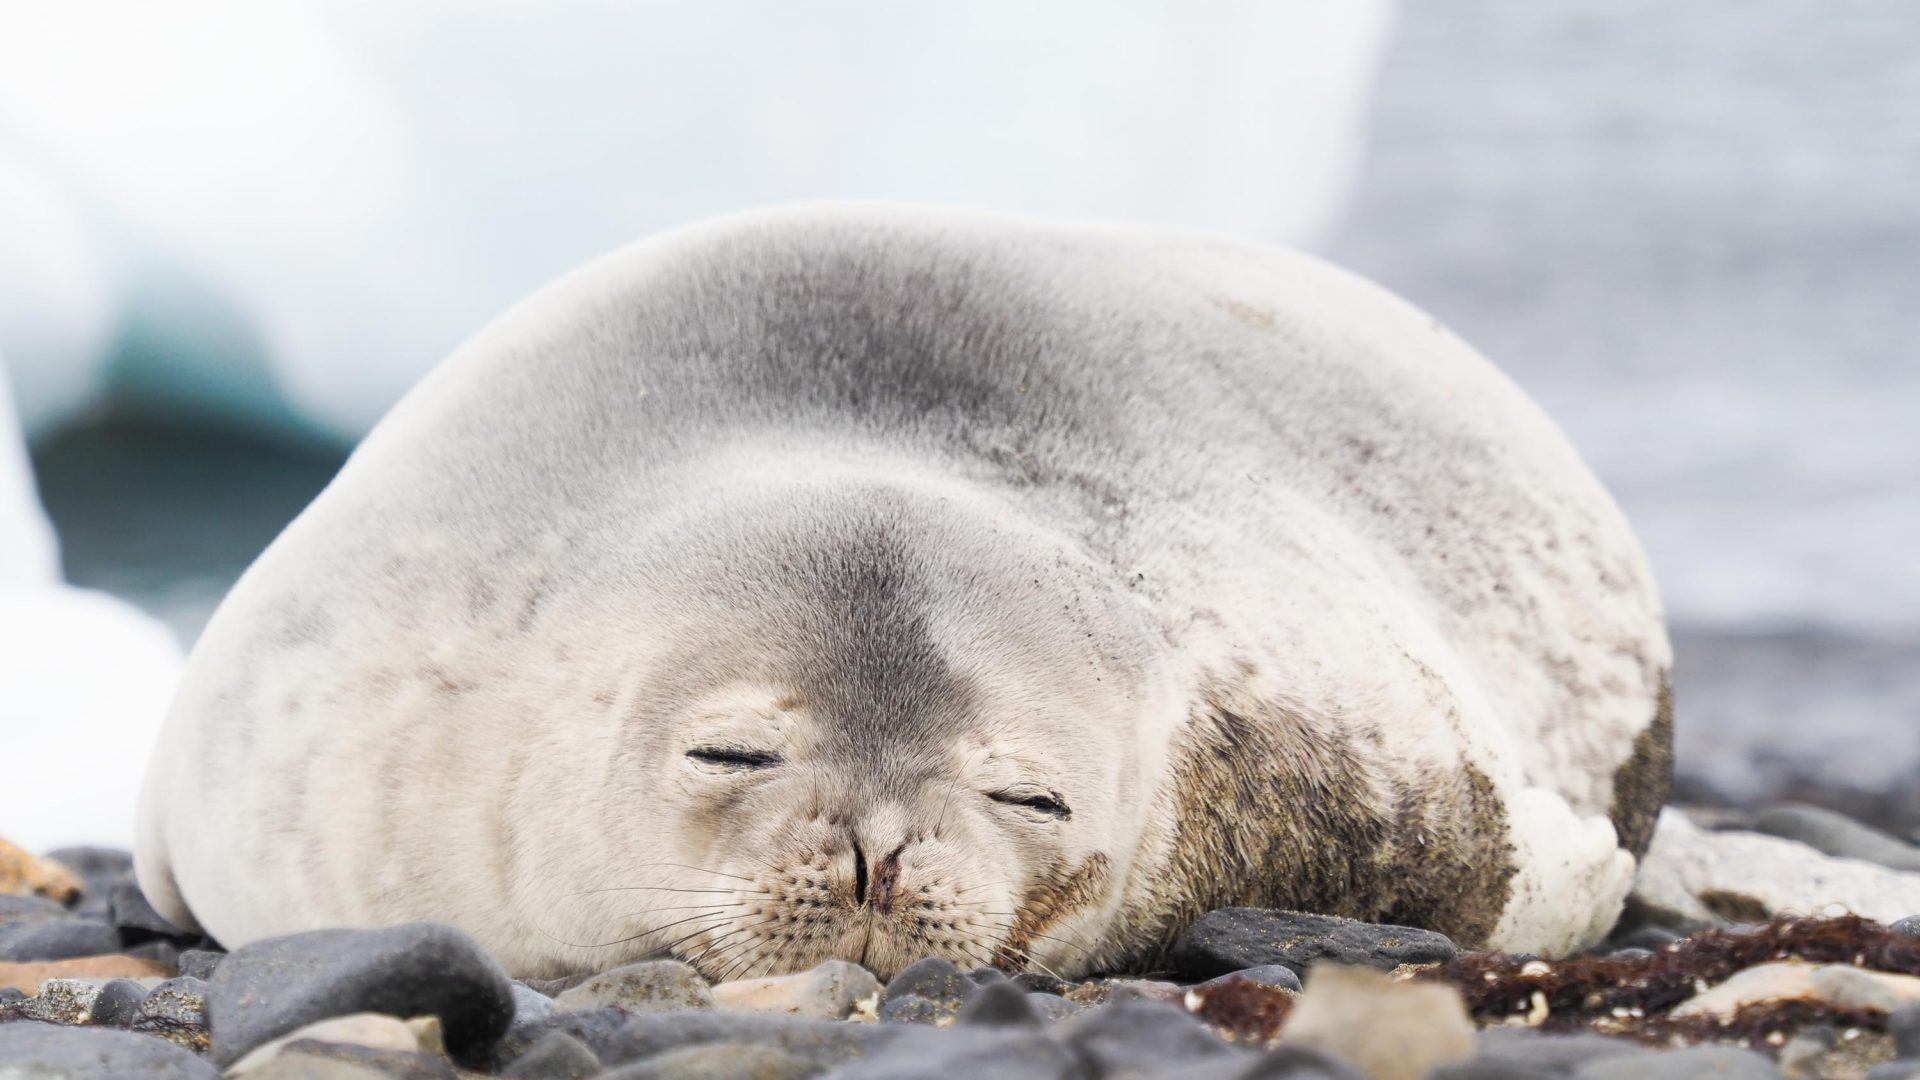 A Weddell seal rests on the shore.